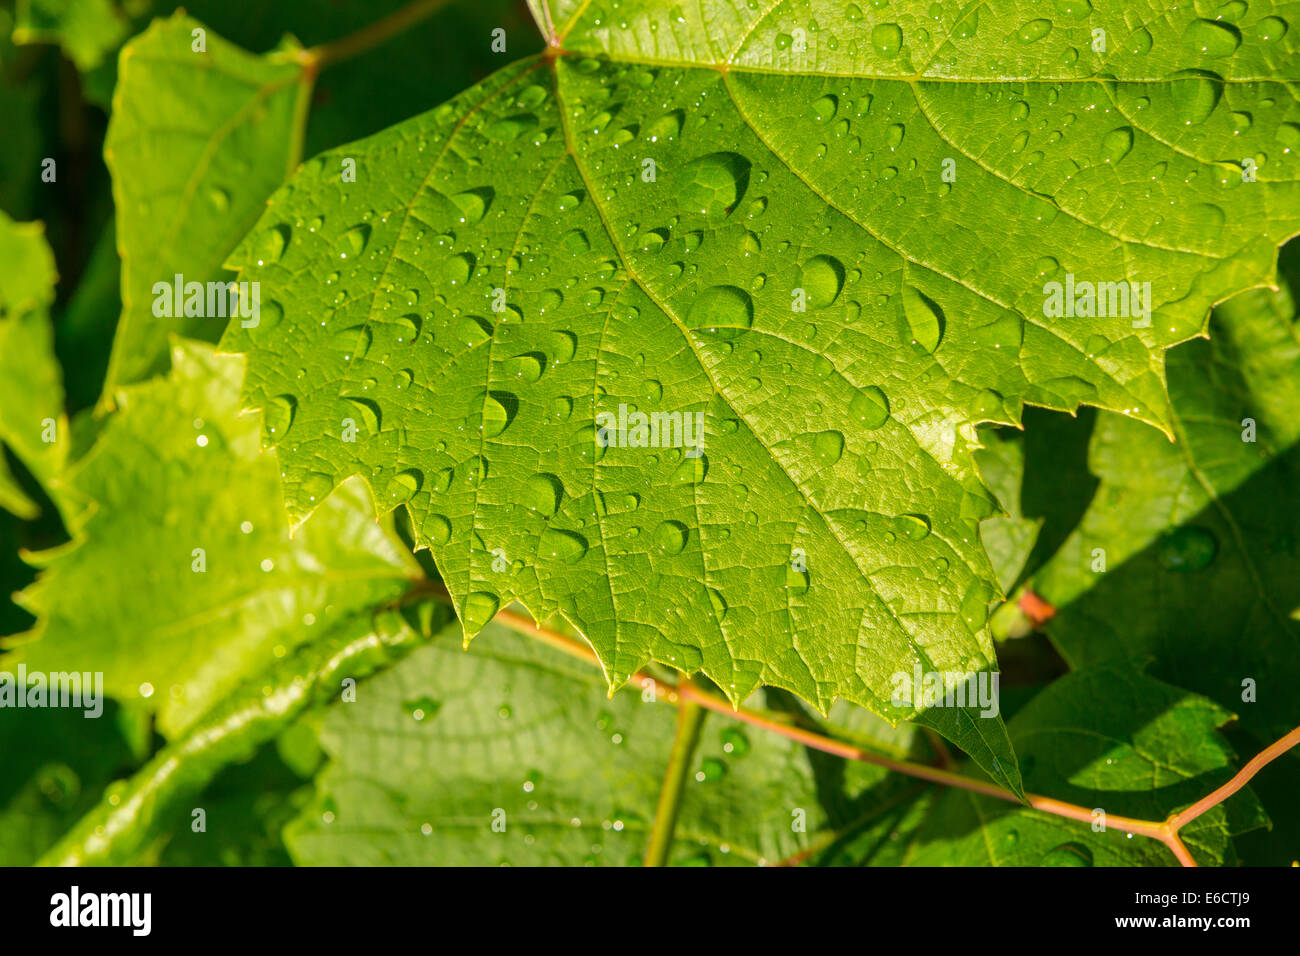 WARREN, VERMONT, USA - Morning dew, water droplets on grape leaves. Stock Photo